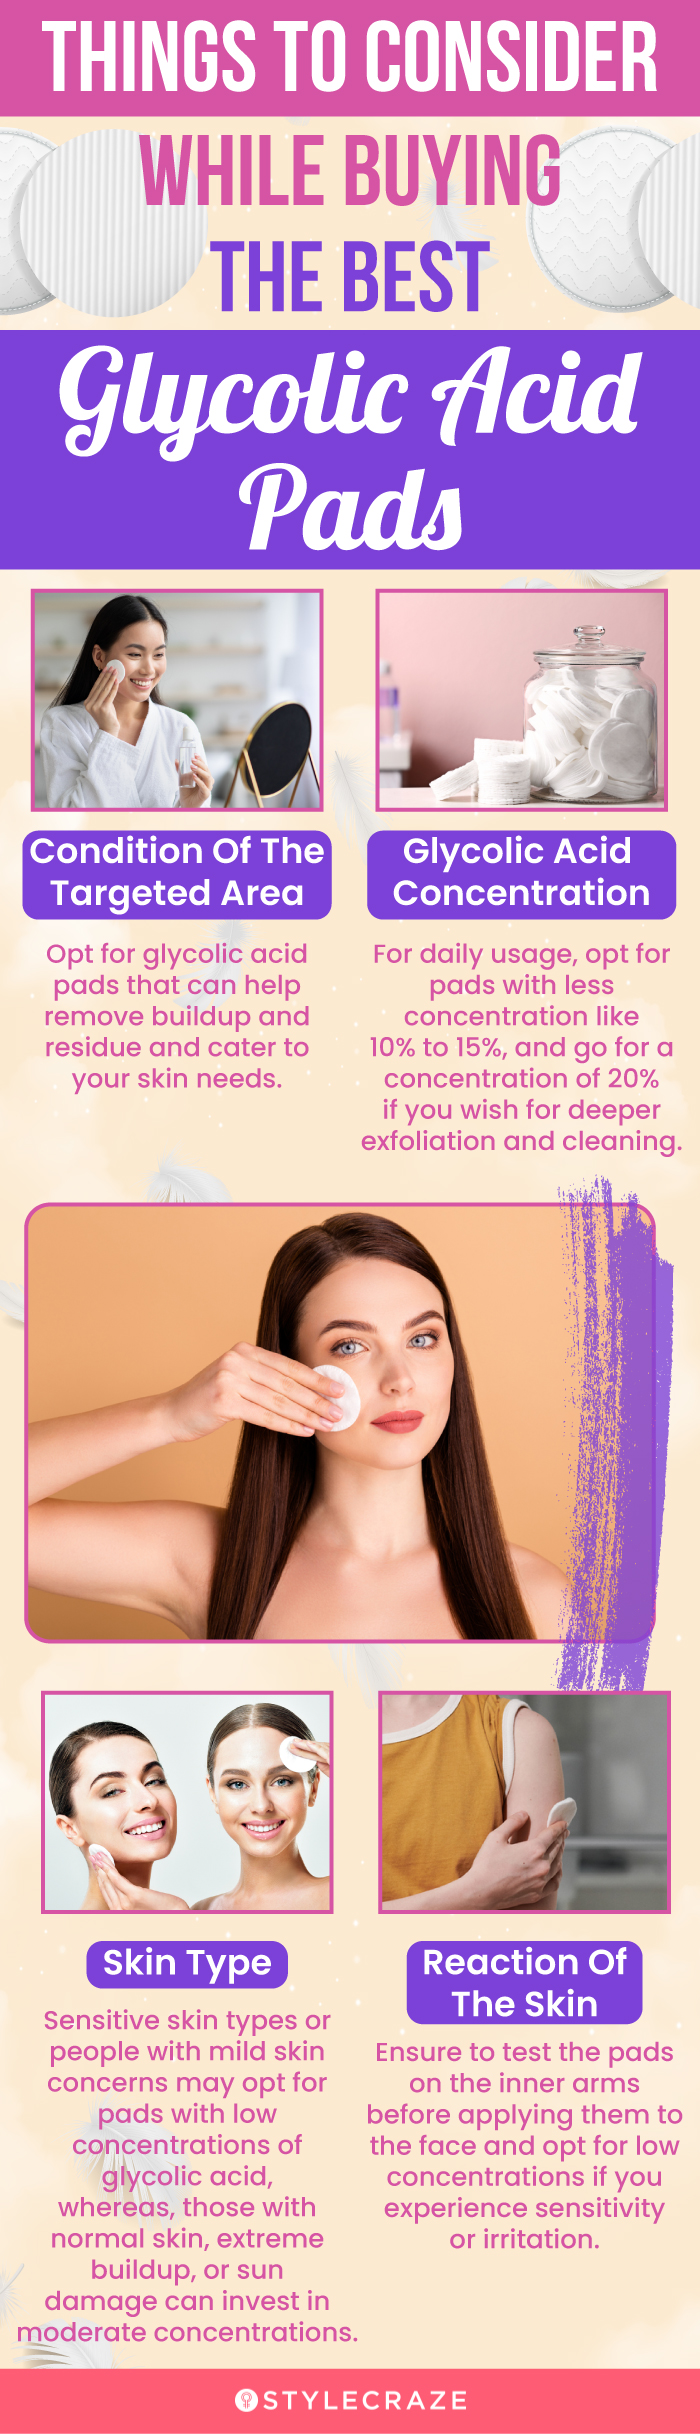 Things To Consider While Buying The Best Glycolic Acid Pads (infographic)